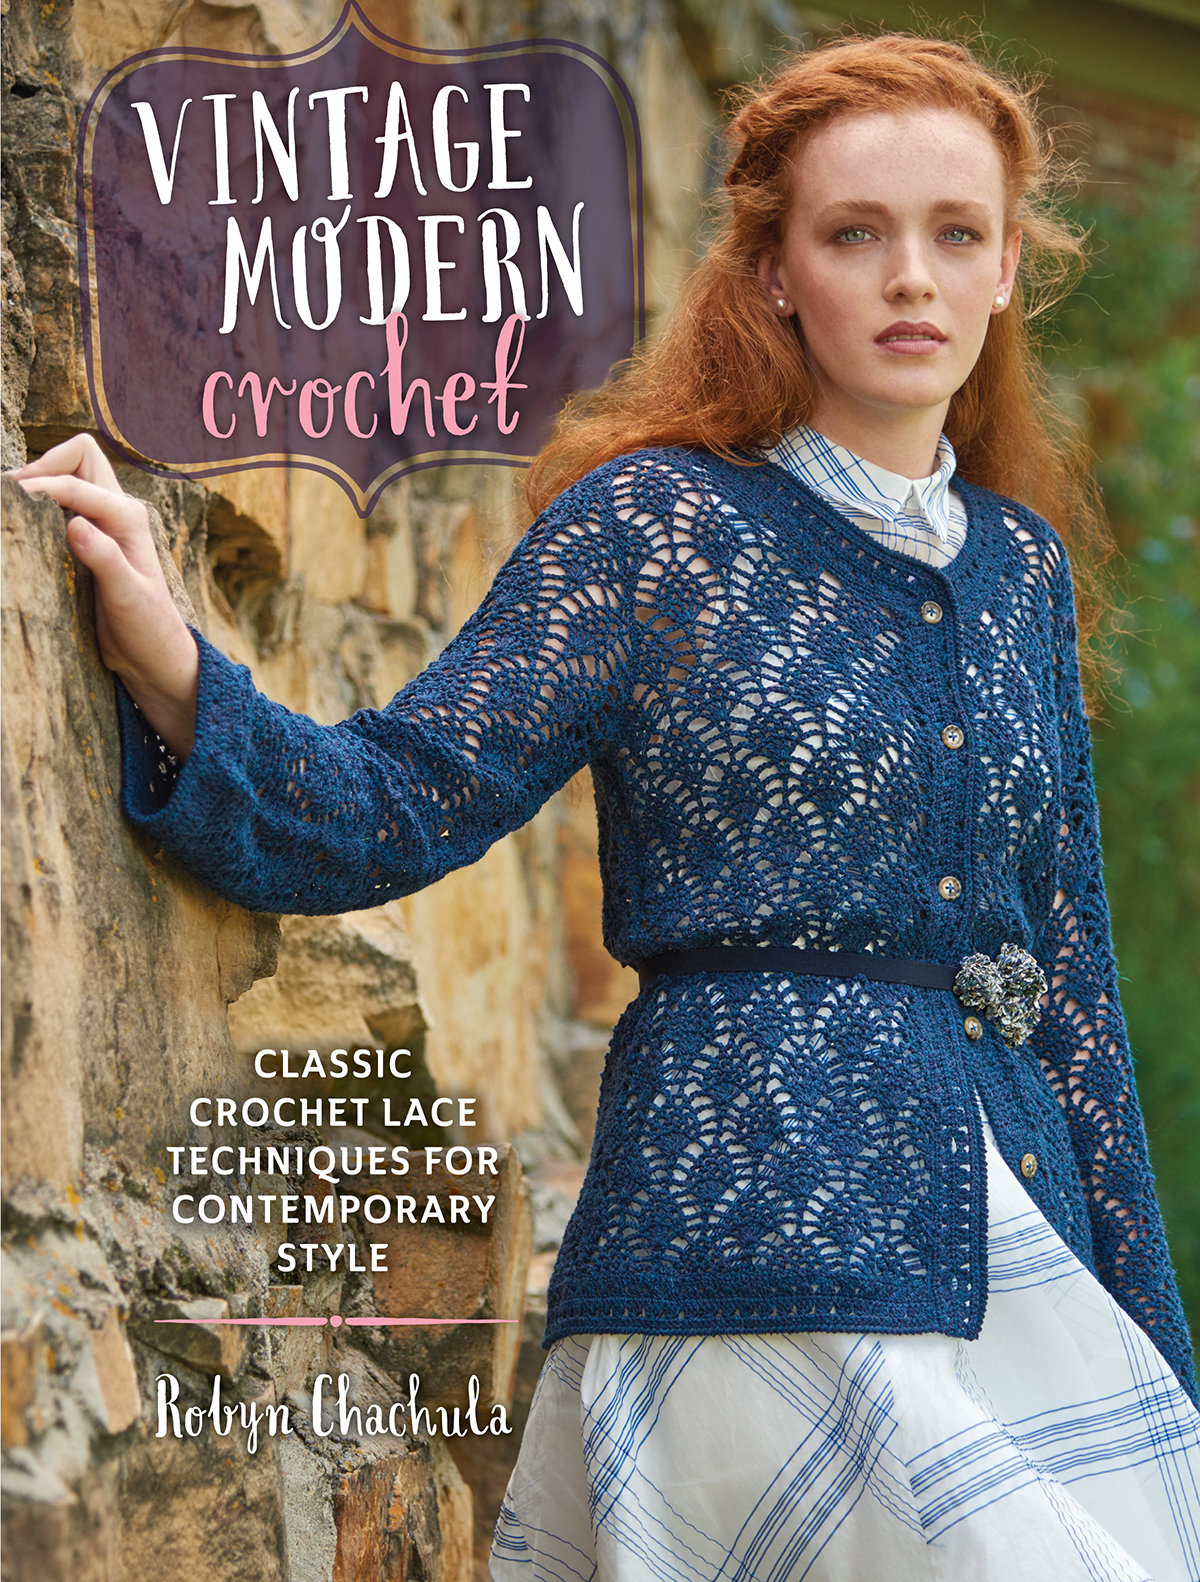 CLASSIC CROCHET LACE TECHNIQUES FOR CONTEMPORARY STYLE Robyn Chachula - photo 1